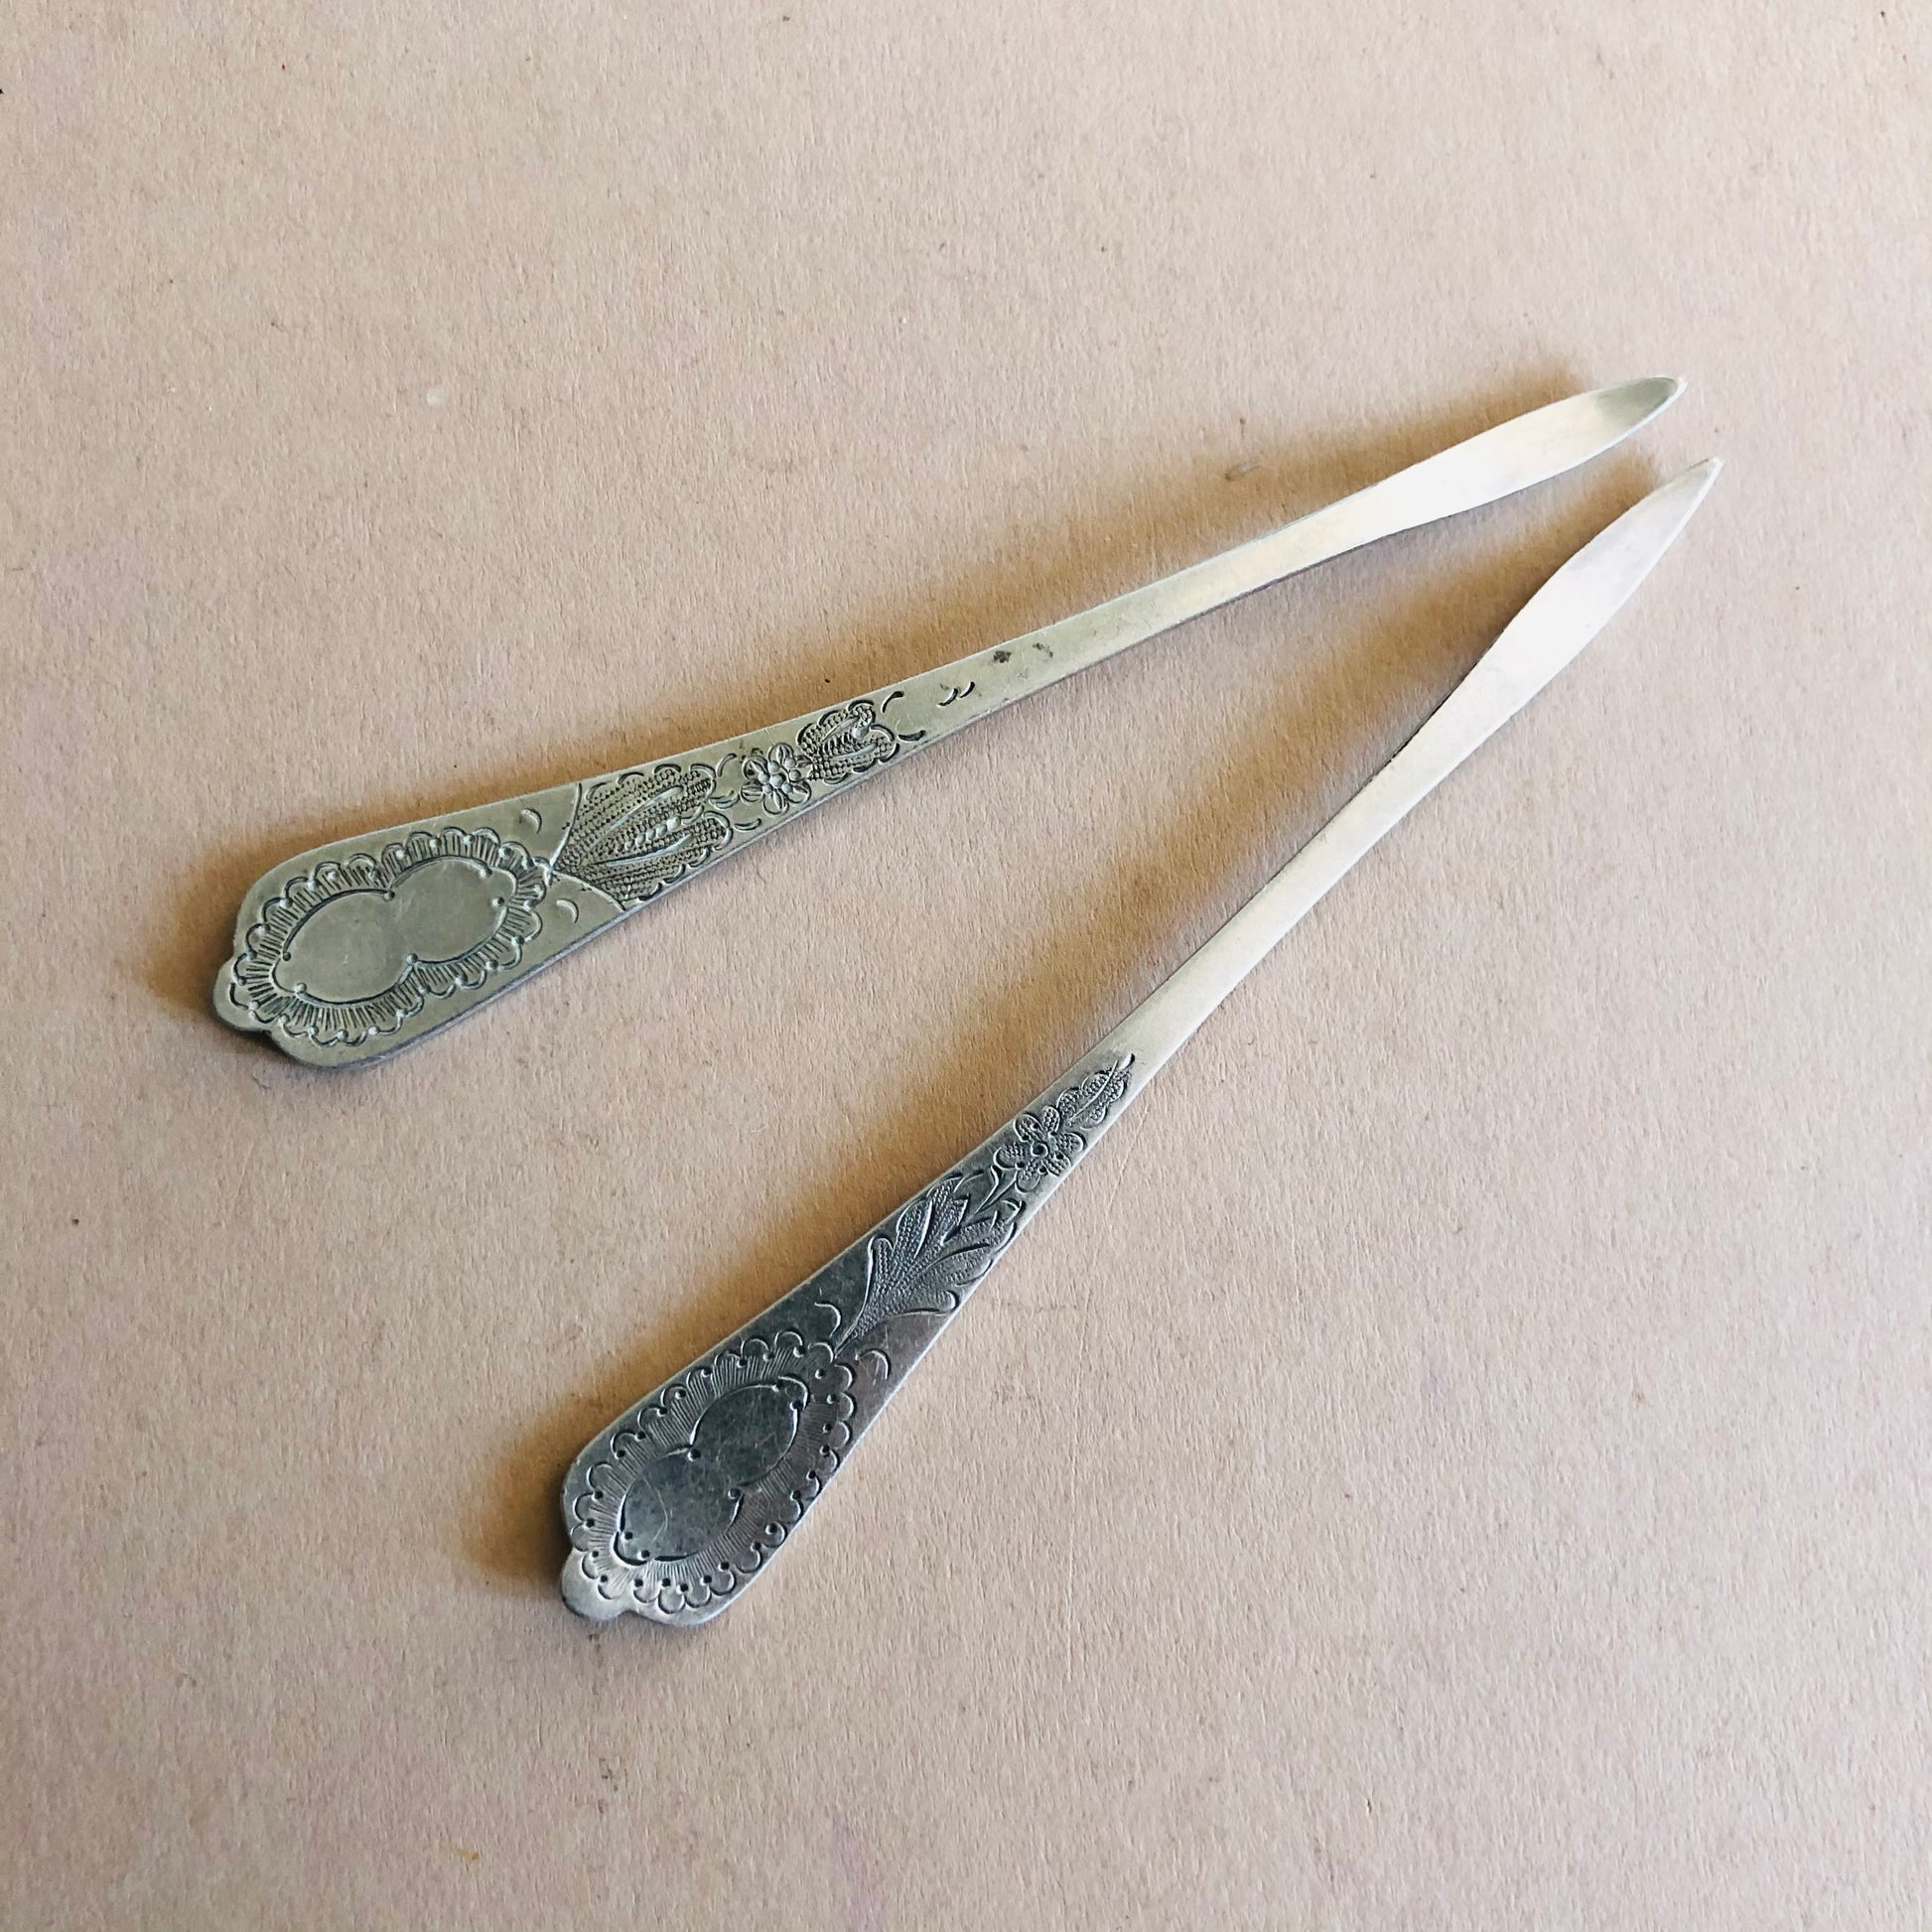 Unusual Antique Silver Engraved Nut Picks. William Hutton and Sons